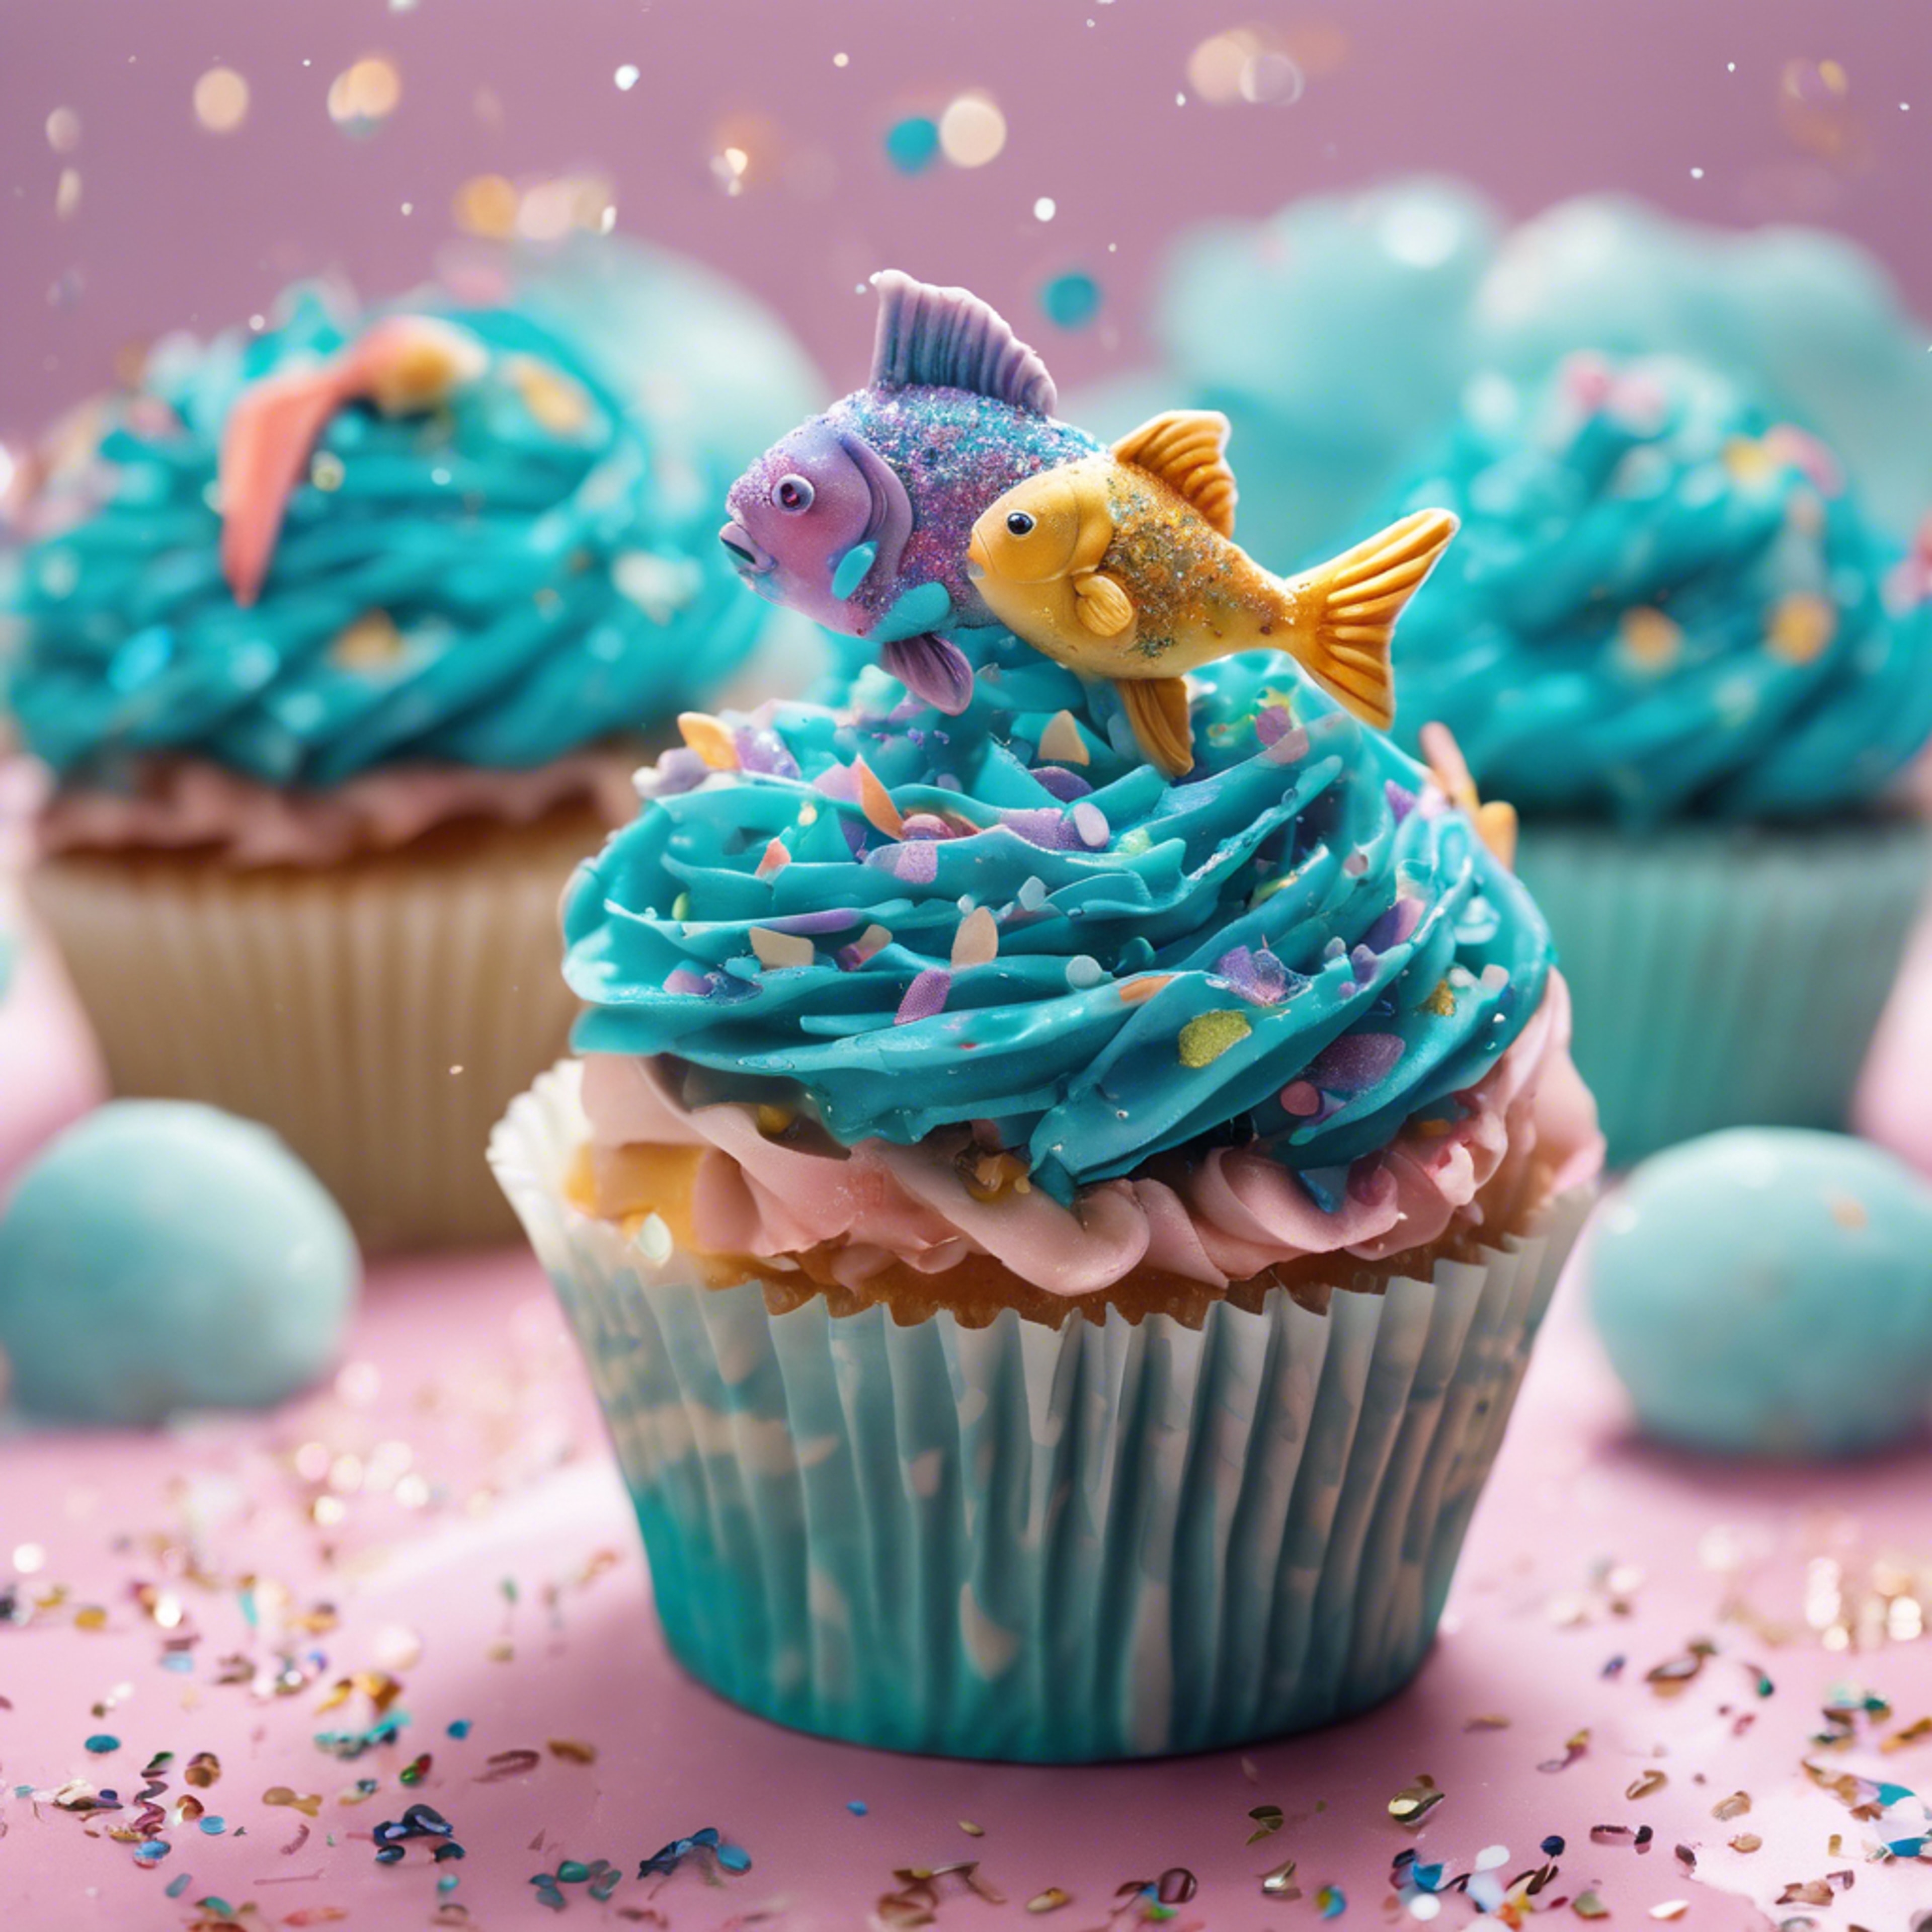 A whimsical Pisces-themed cupcake, with decorative icing representing two cute fish swimming in a sea of sprinkles. Tapetai[694d5145c111483cb550]